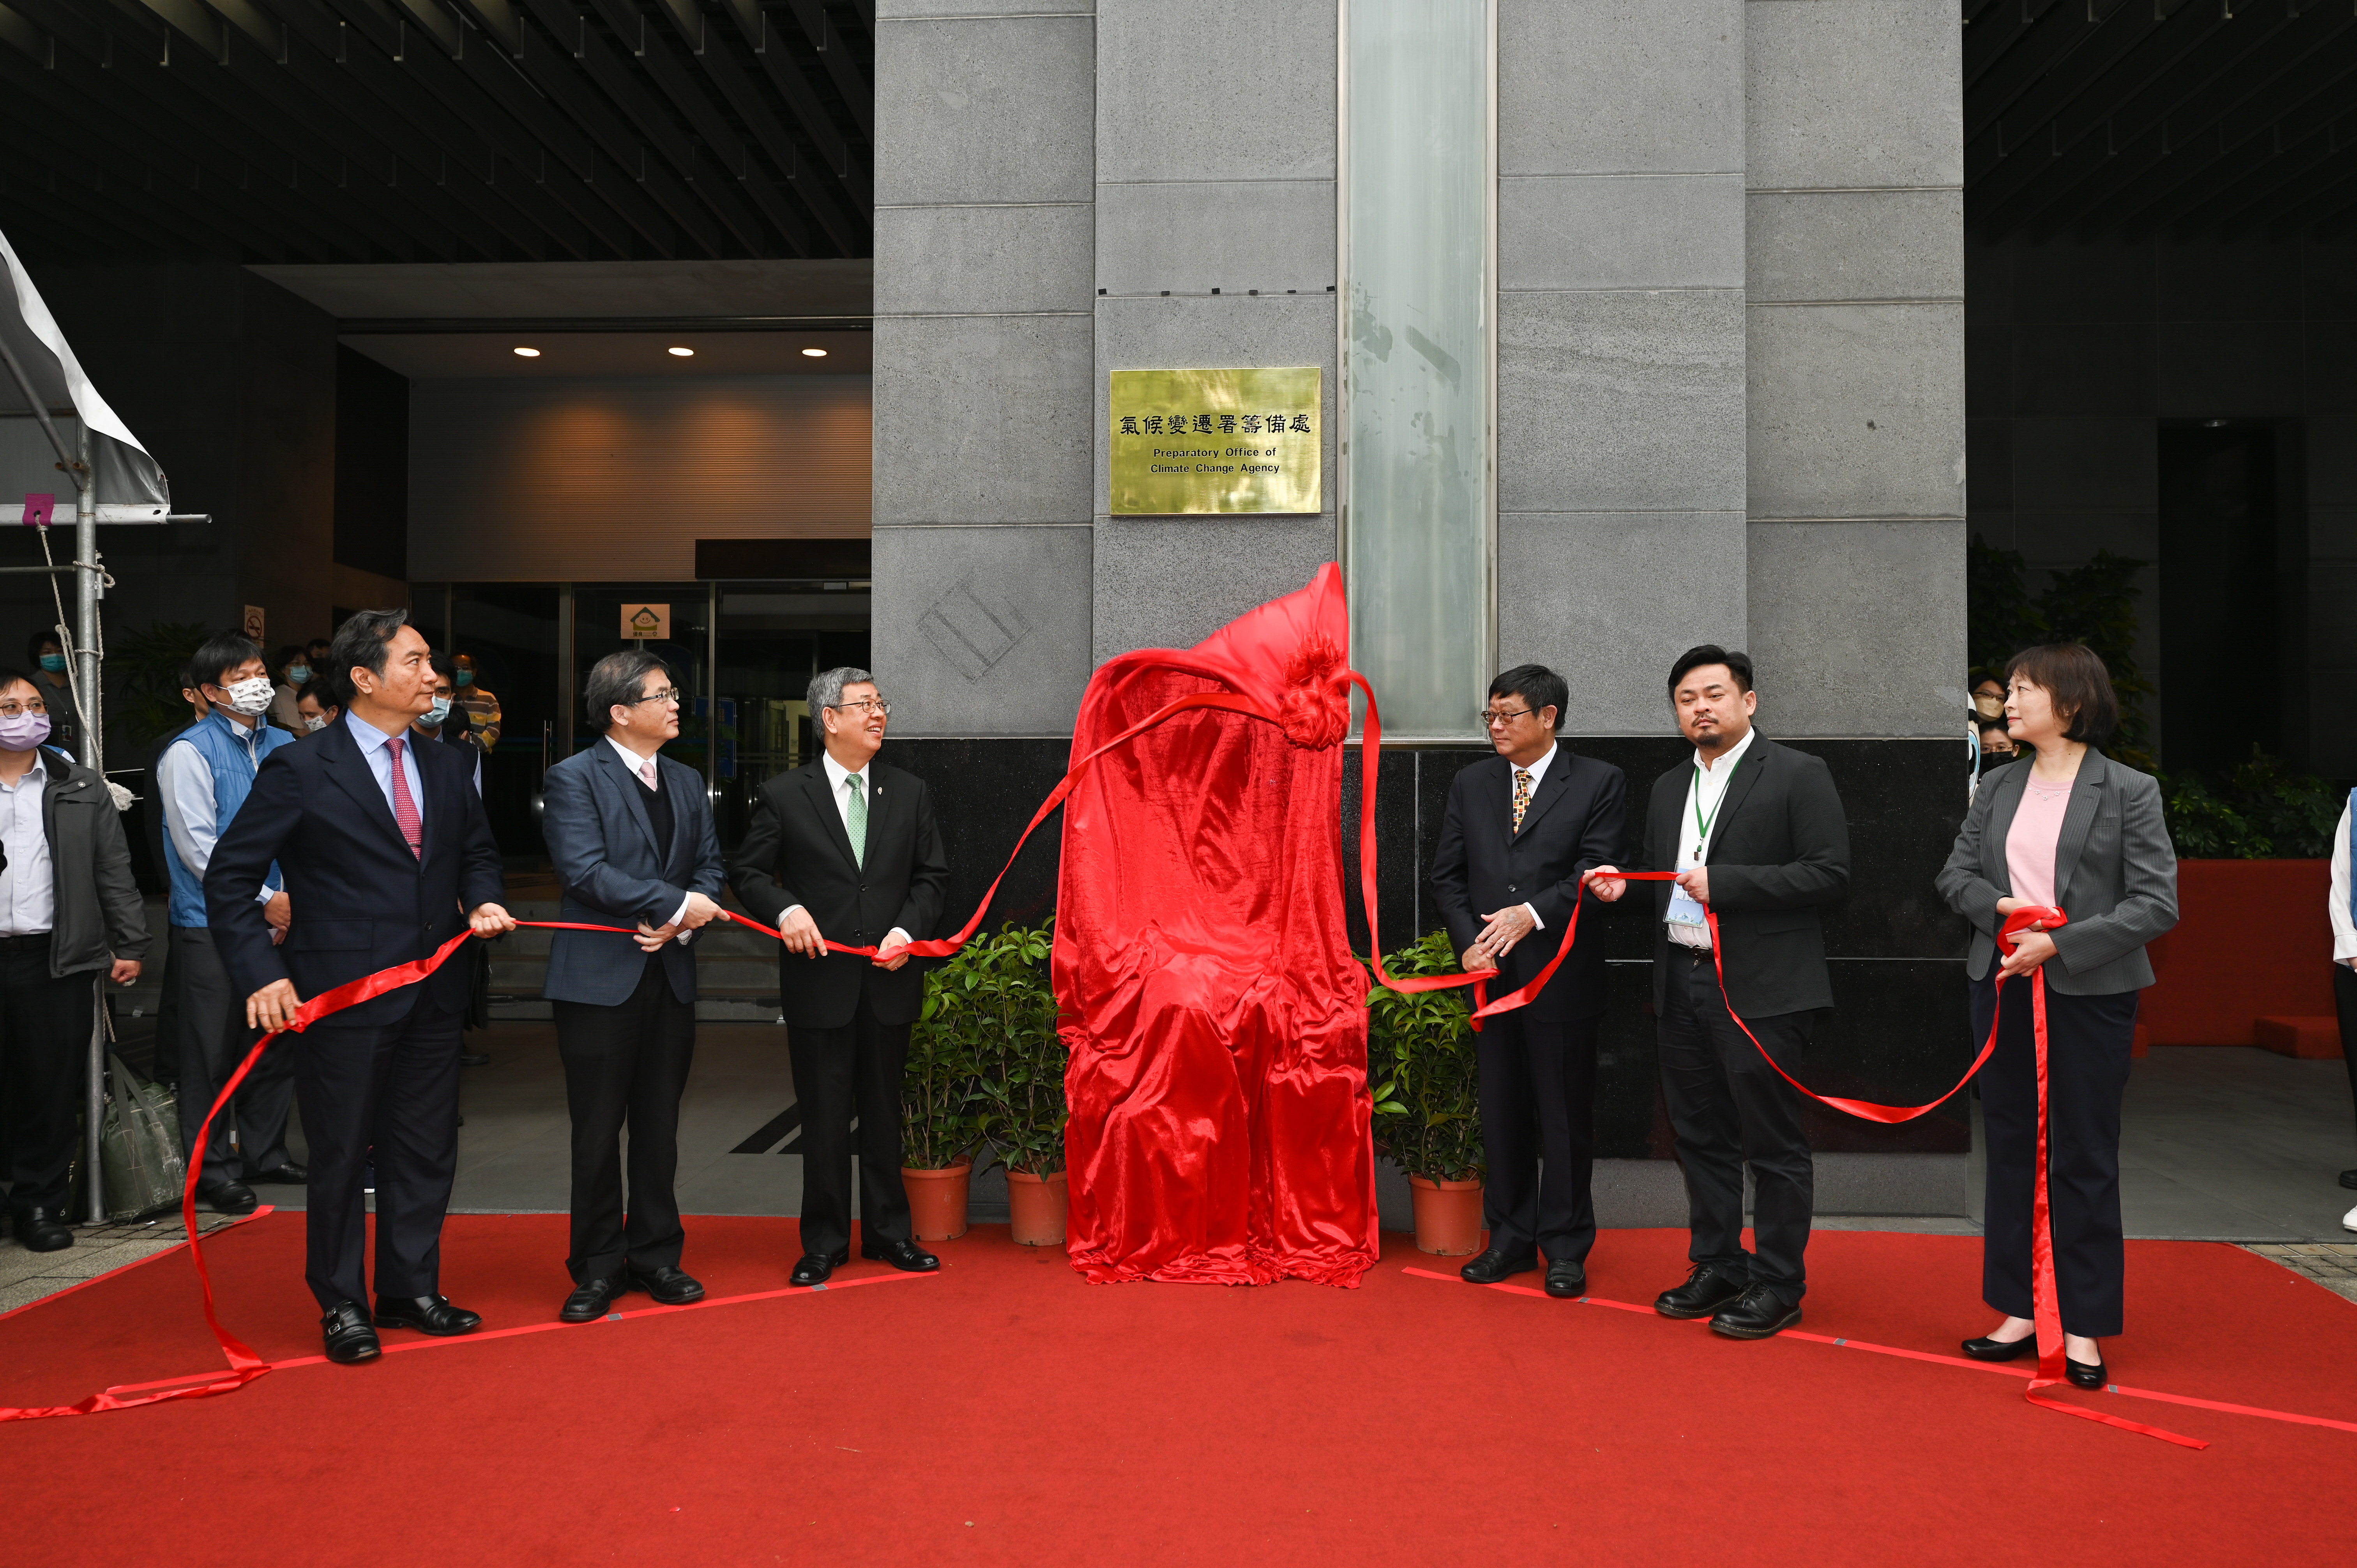 The unveiling ceremony of the Preparatory Office of the Climate Change Agency (from left to right: Minister without Portfolio Lo Ping-Cheng, Secretary General Li Meng-Yen, Premier Chen Chien-Jen, EPA Minister Chang Tzi-Chin, Legislator Hung Sun-Han, Director of POCCA Tsai Lin-Yi)